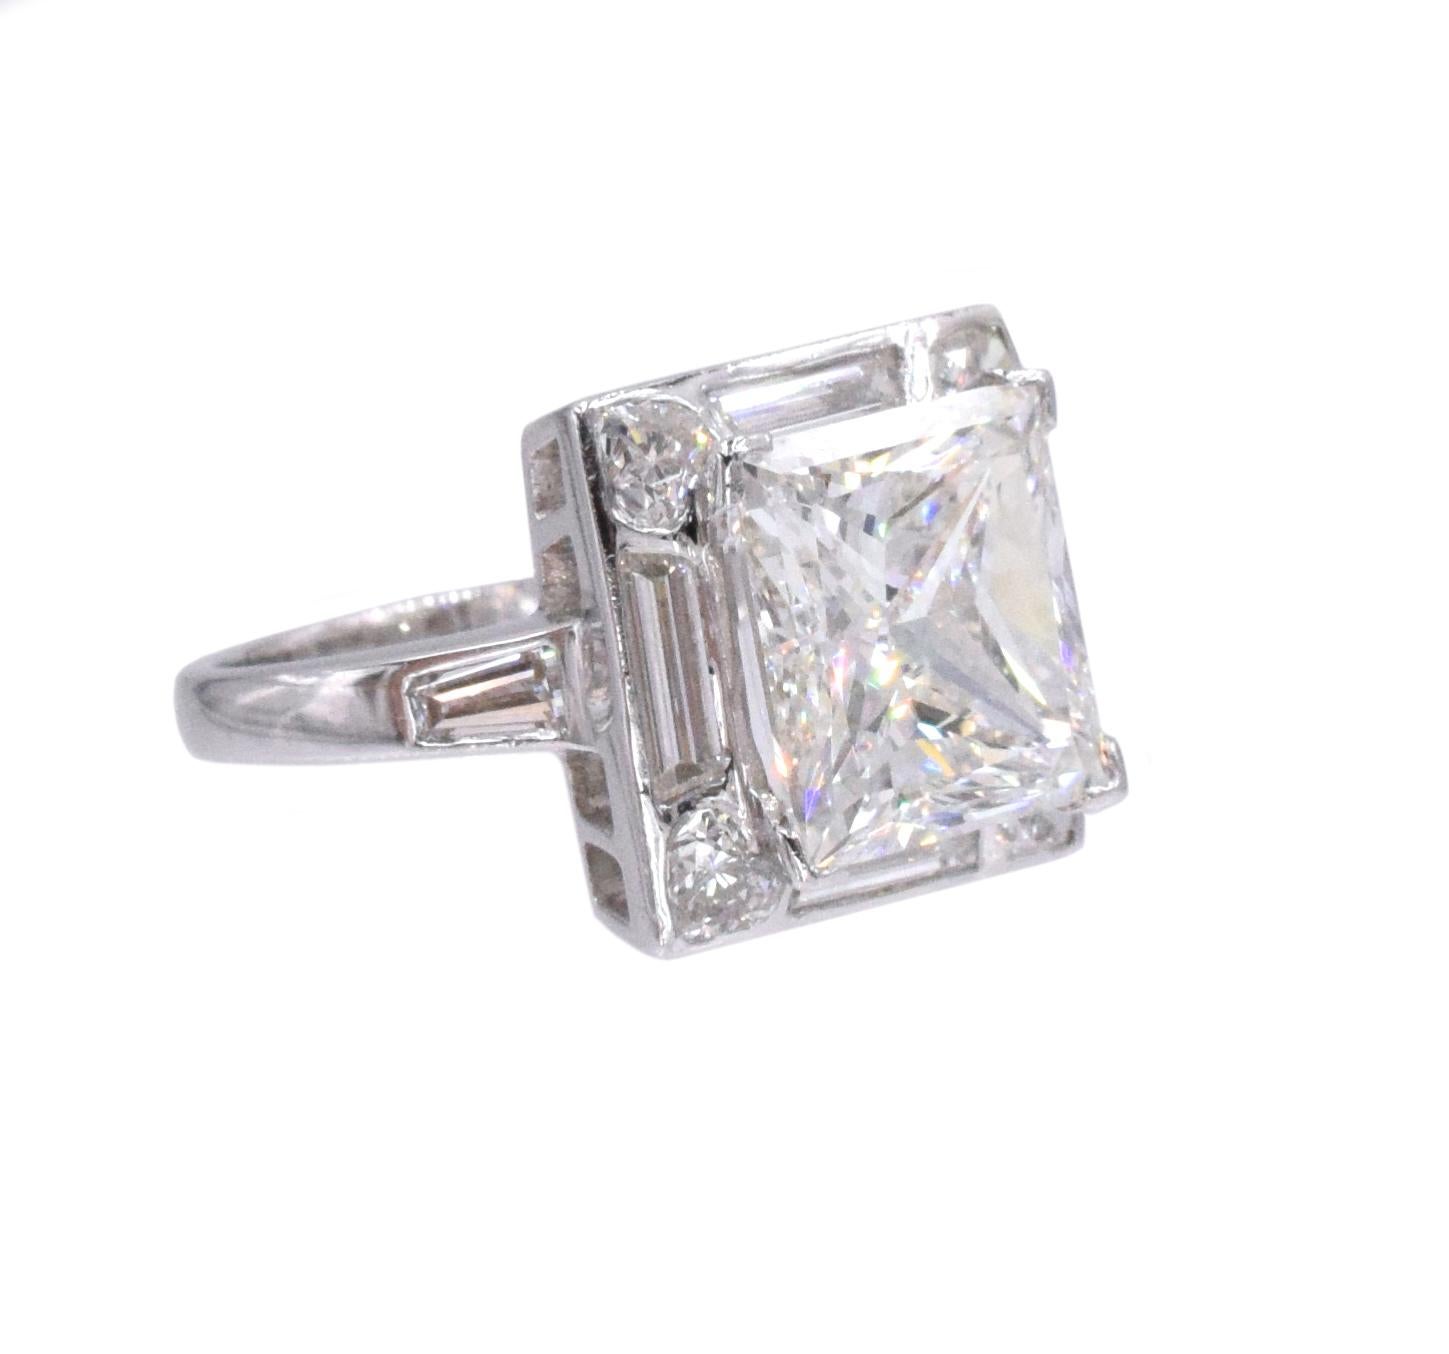 Diamond engagement ring set in platinum.

This gorgeous ring is  set with 4.01ct princess cut diamond in the center. The diamond color G, clarity VS1, with a certificate - GIA#8440332.

With four trapezoid cut diamonds adorning the ring, weighing